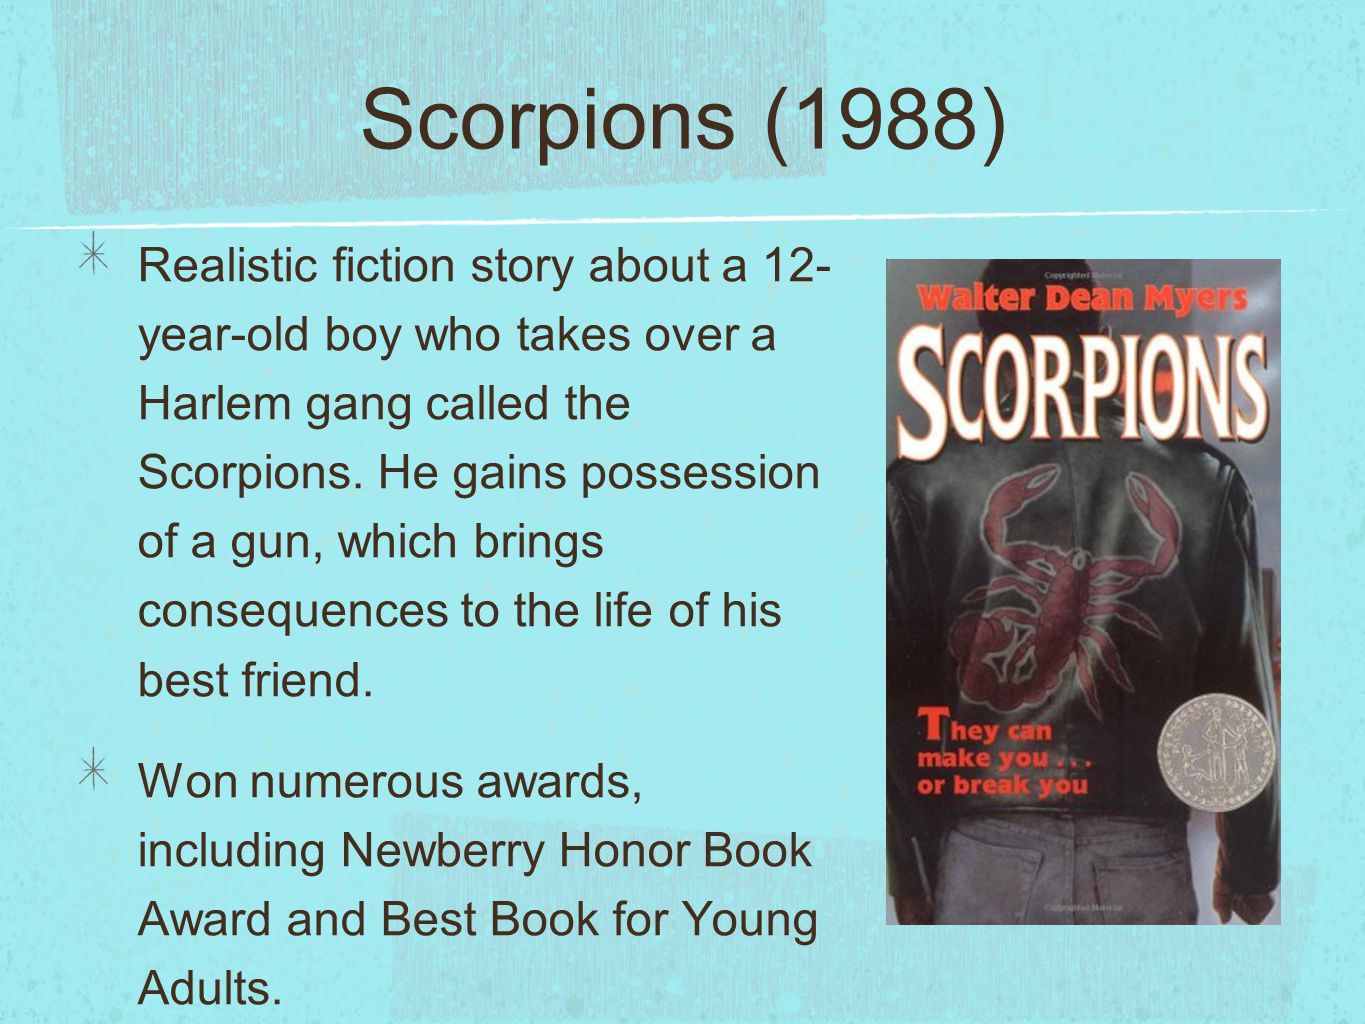 Scorpions (1988) Realistic fiction story about a 12- year-old boy who takes over a Harlem gang called the Scorpions.